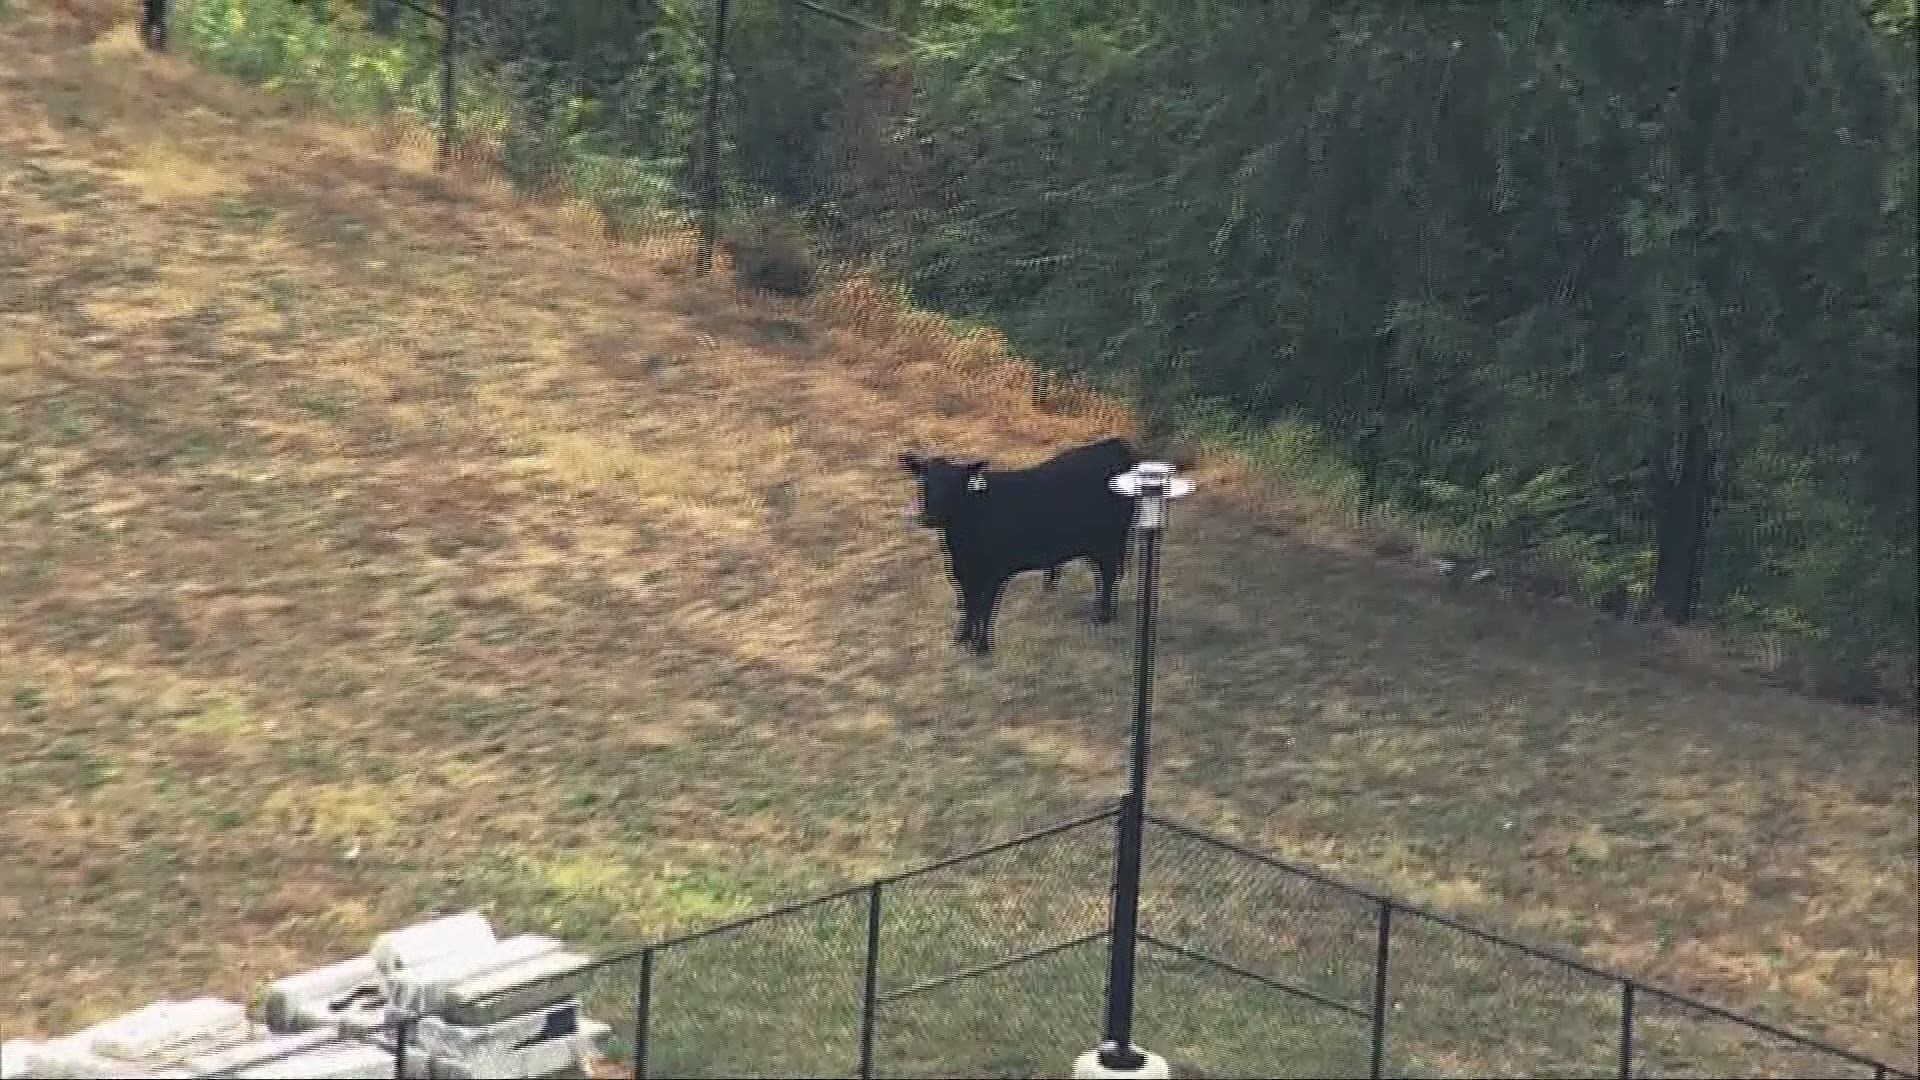 Baltimore officials are assessing how to capture a bull that jumped off a truck.